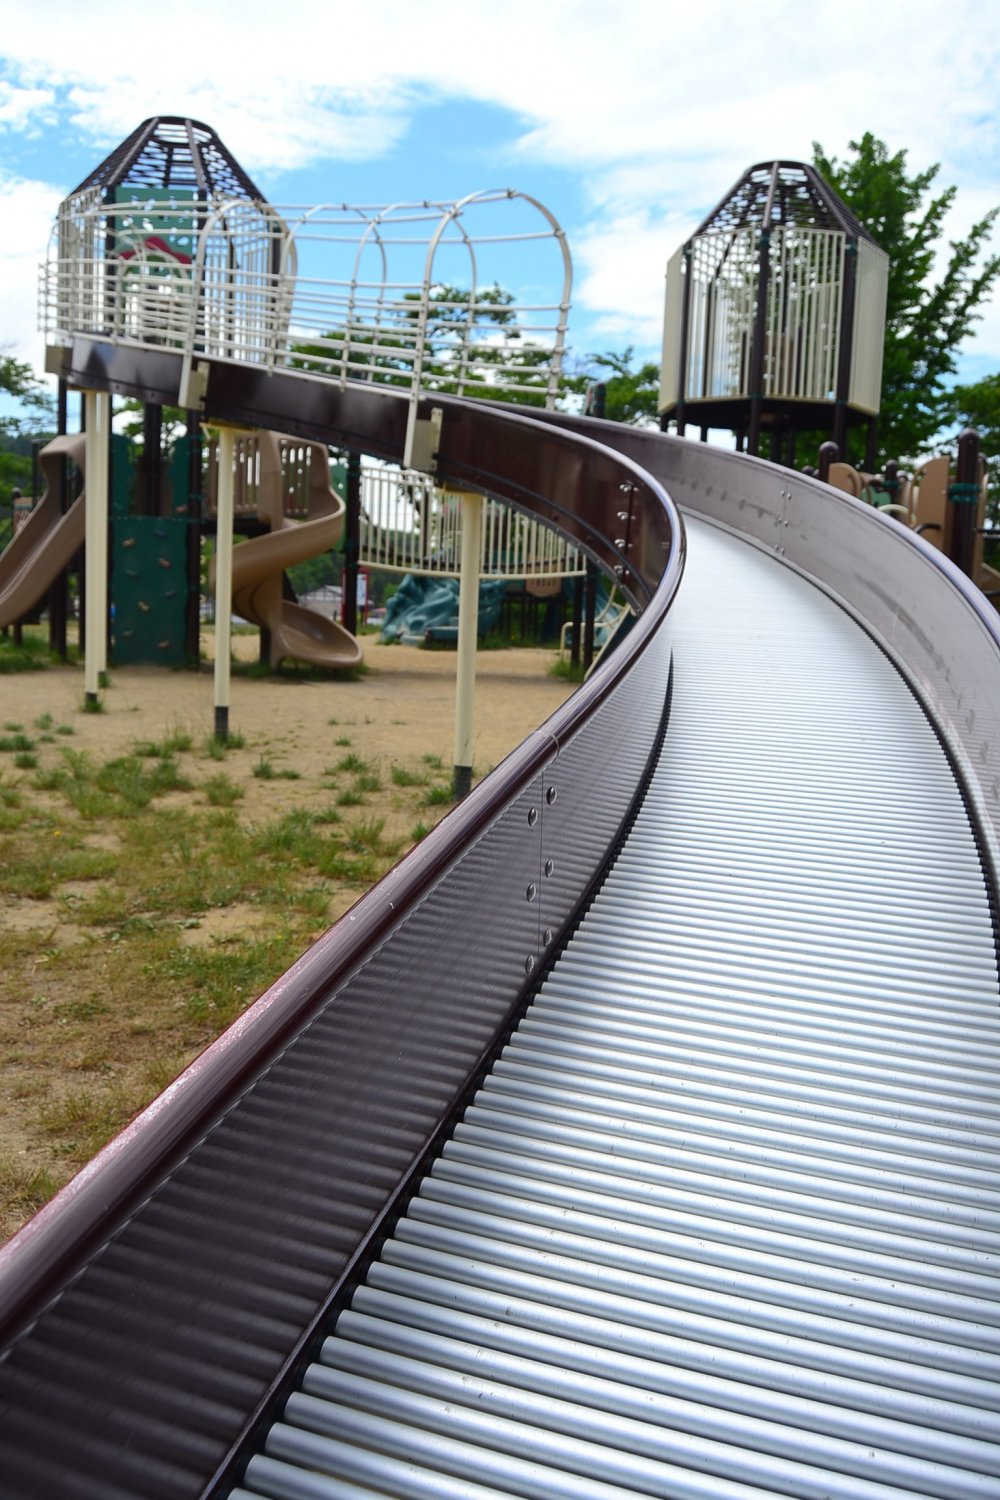 Have fun on this fast and slippery slide!